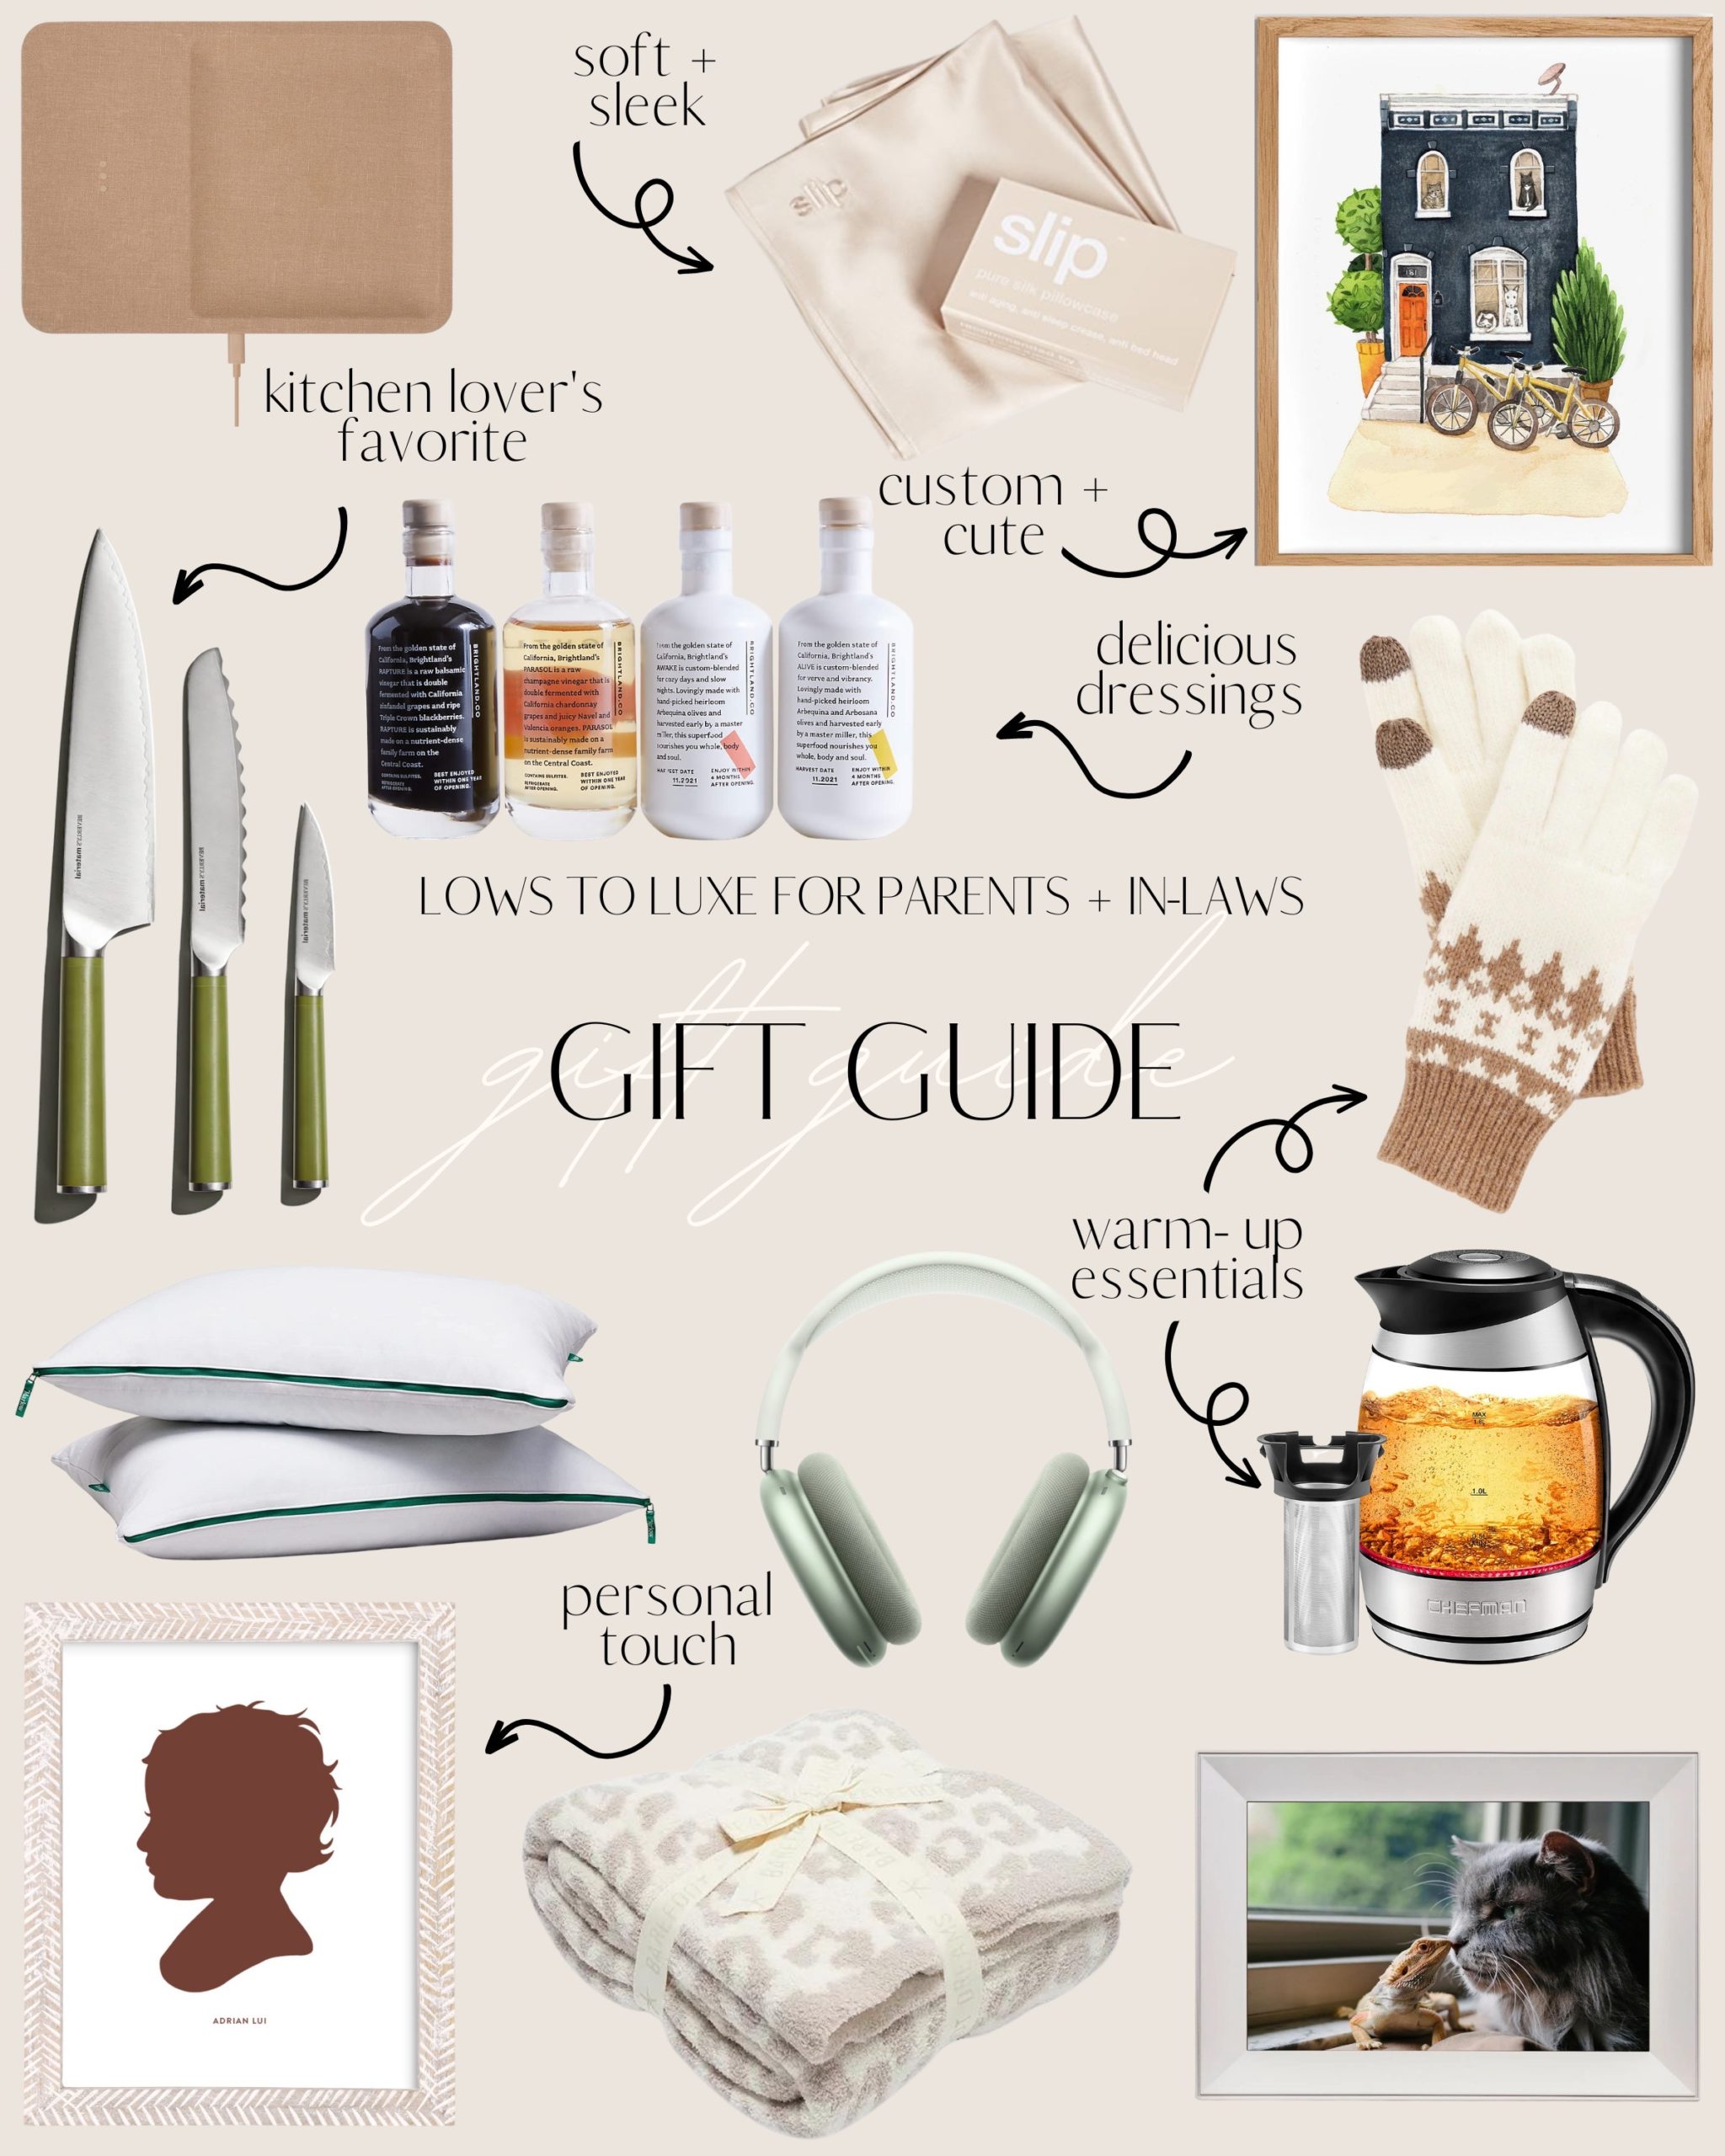 A Gift Guide for Parents, In-Laws And Grandparents - Sunsets and Stilettos